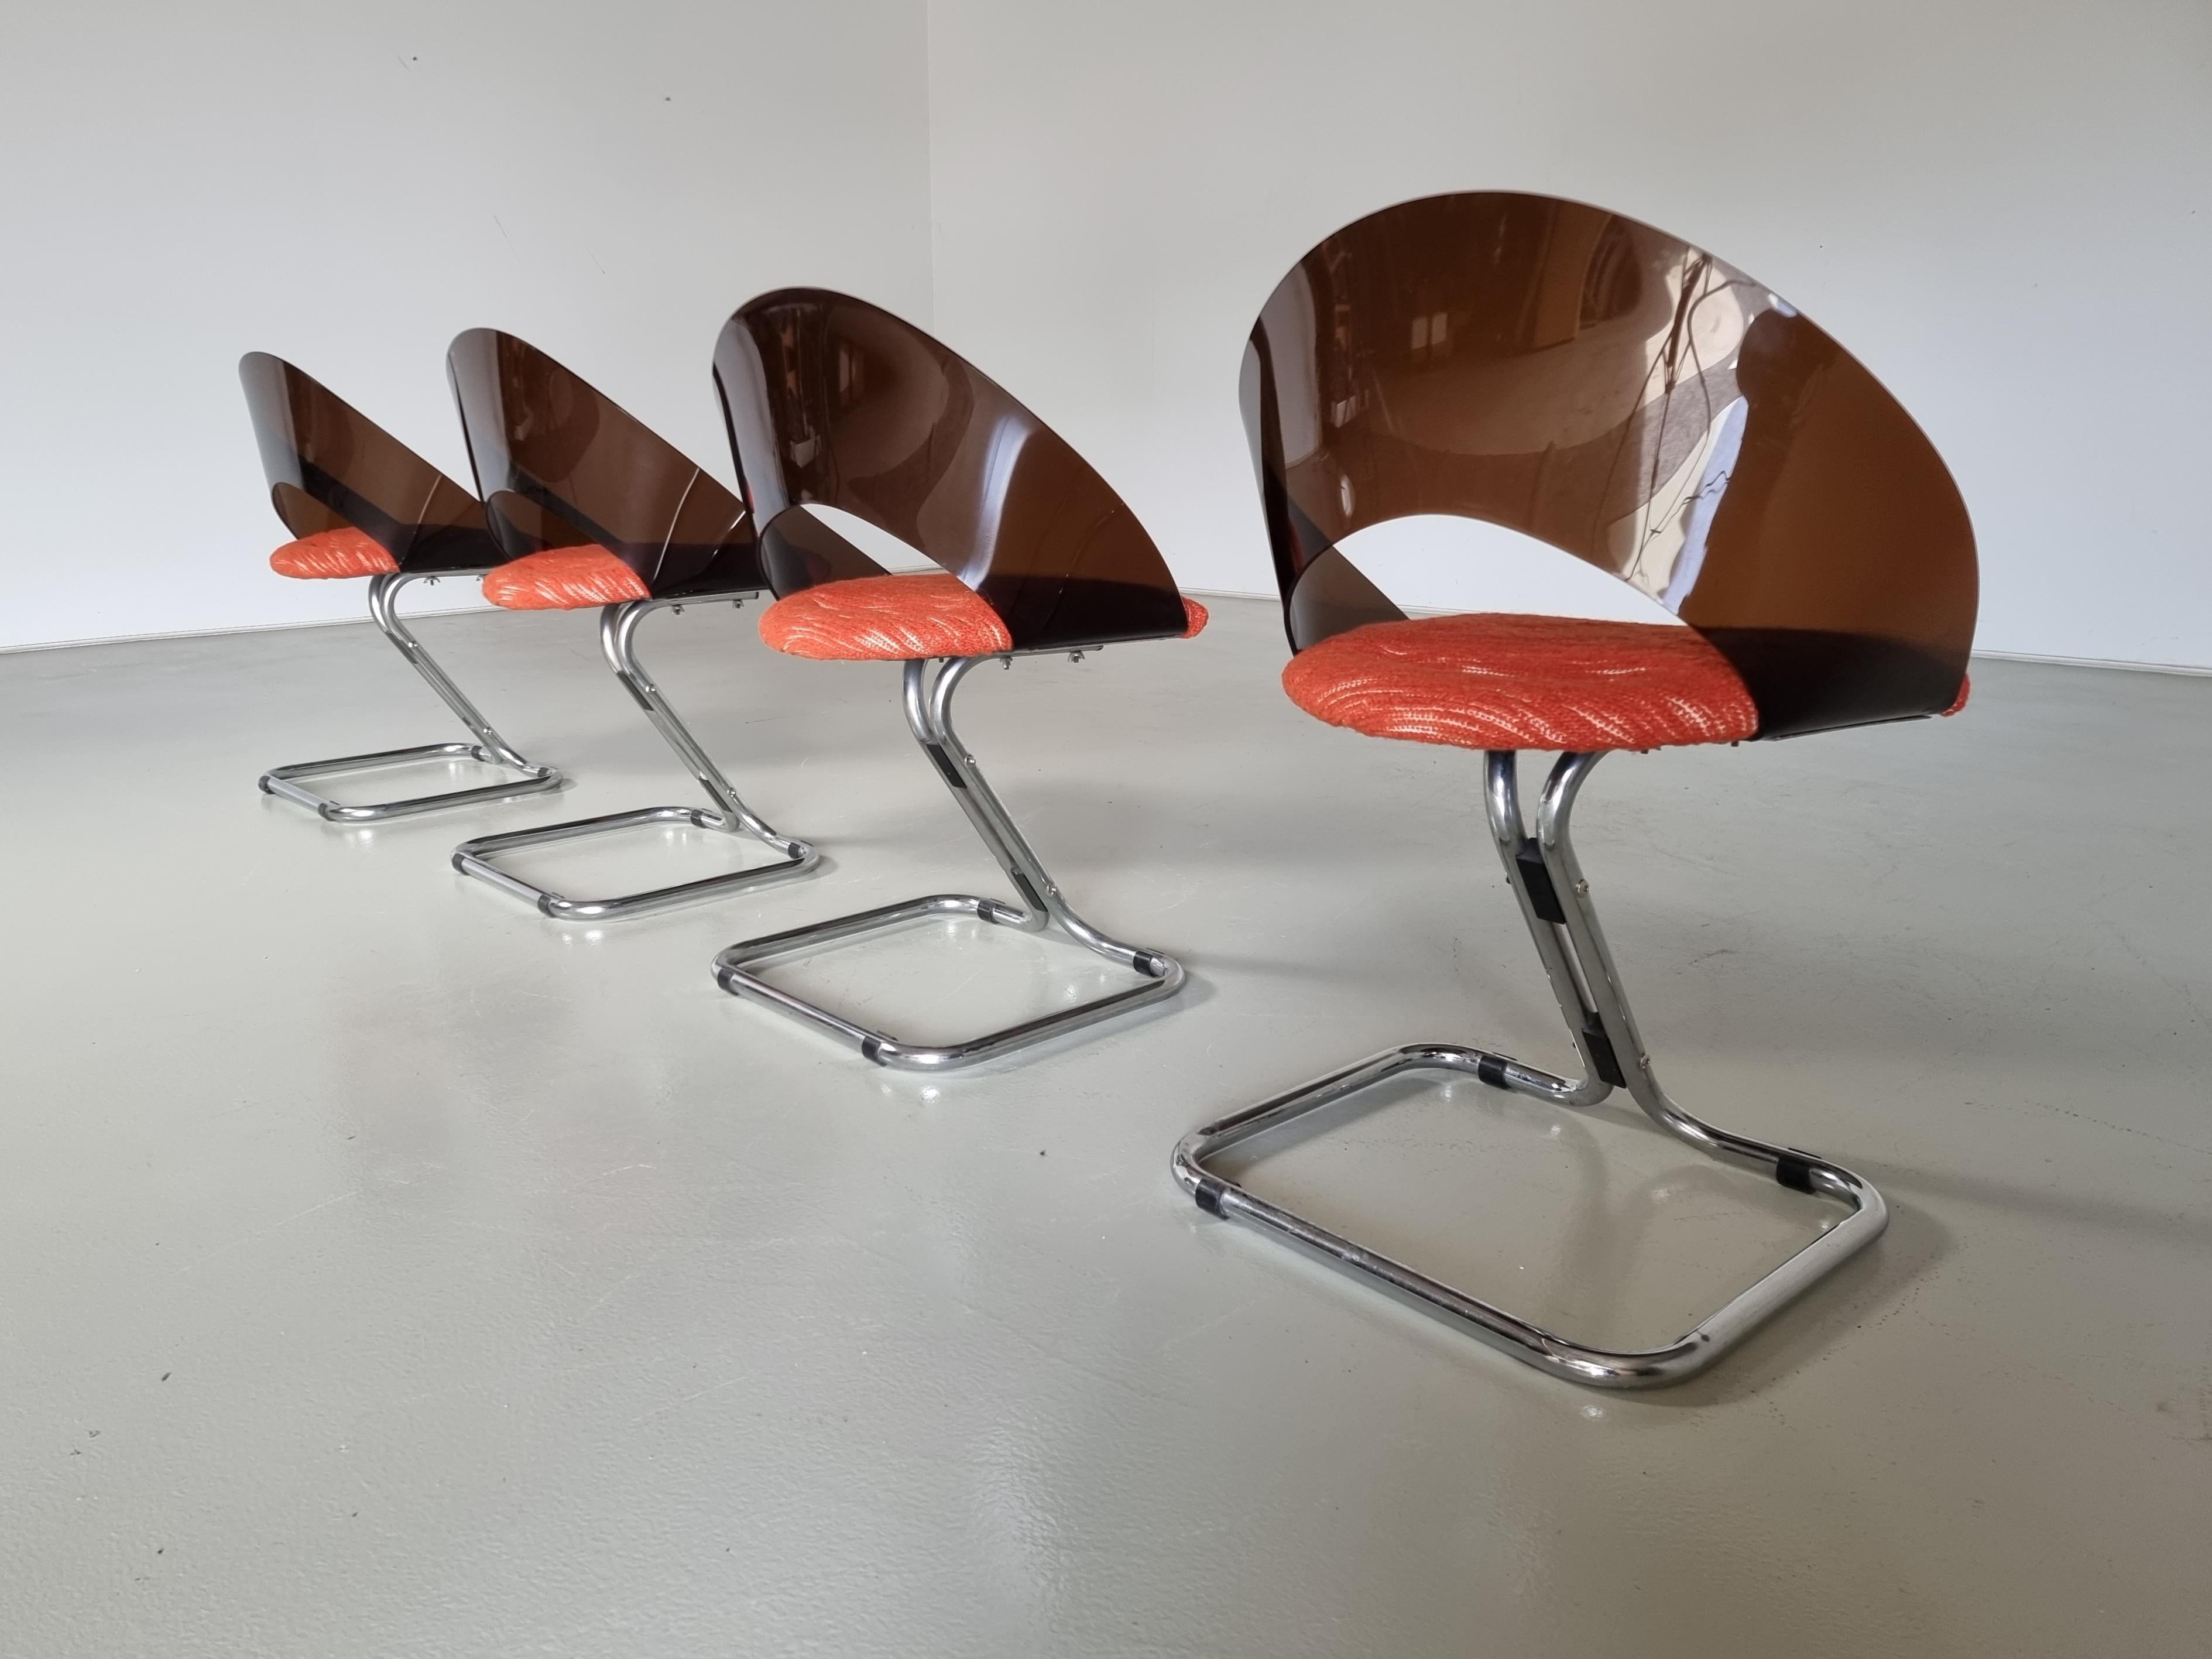 European Set of 4 Italian Spage Age Plexiglass Dining Chairs, 1970s For Sale